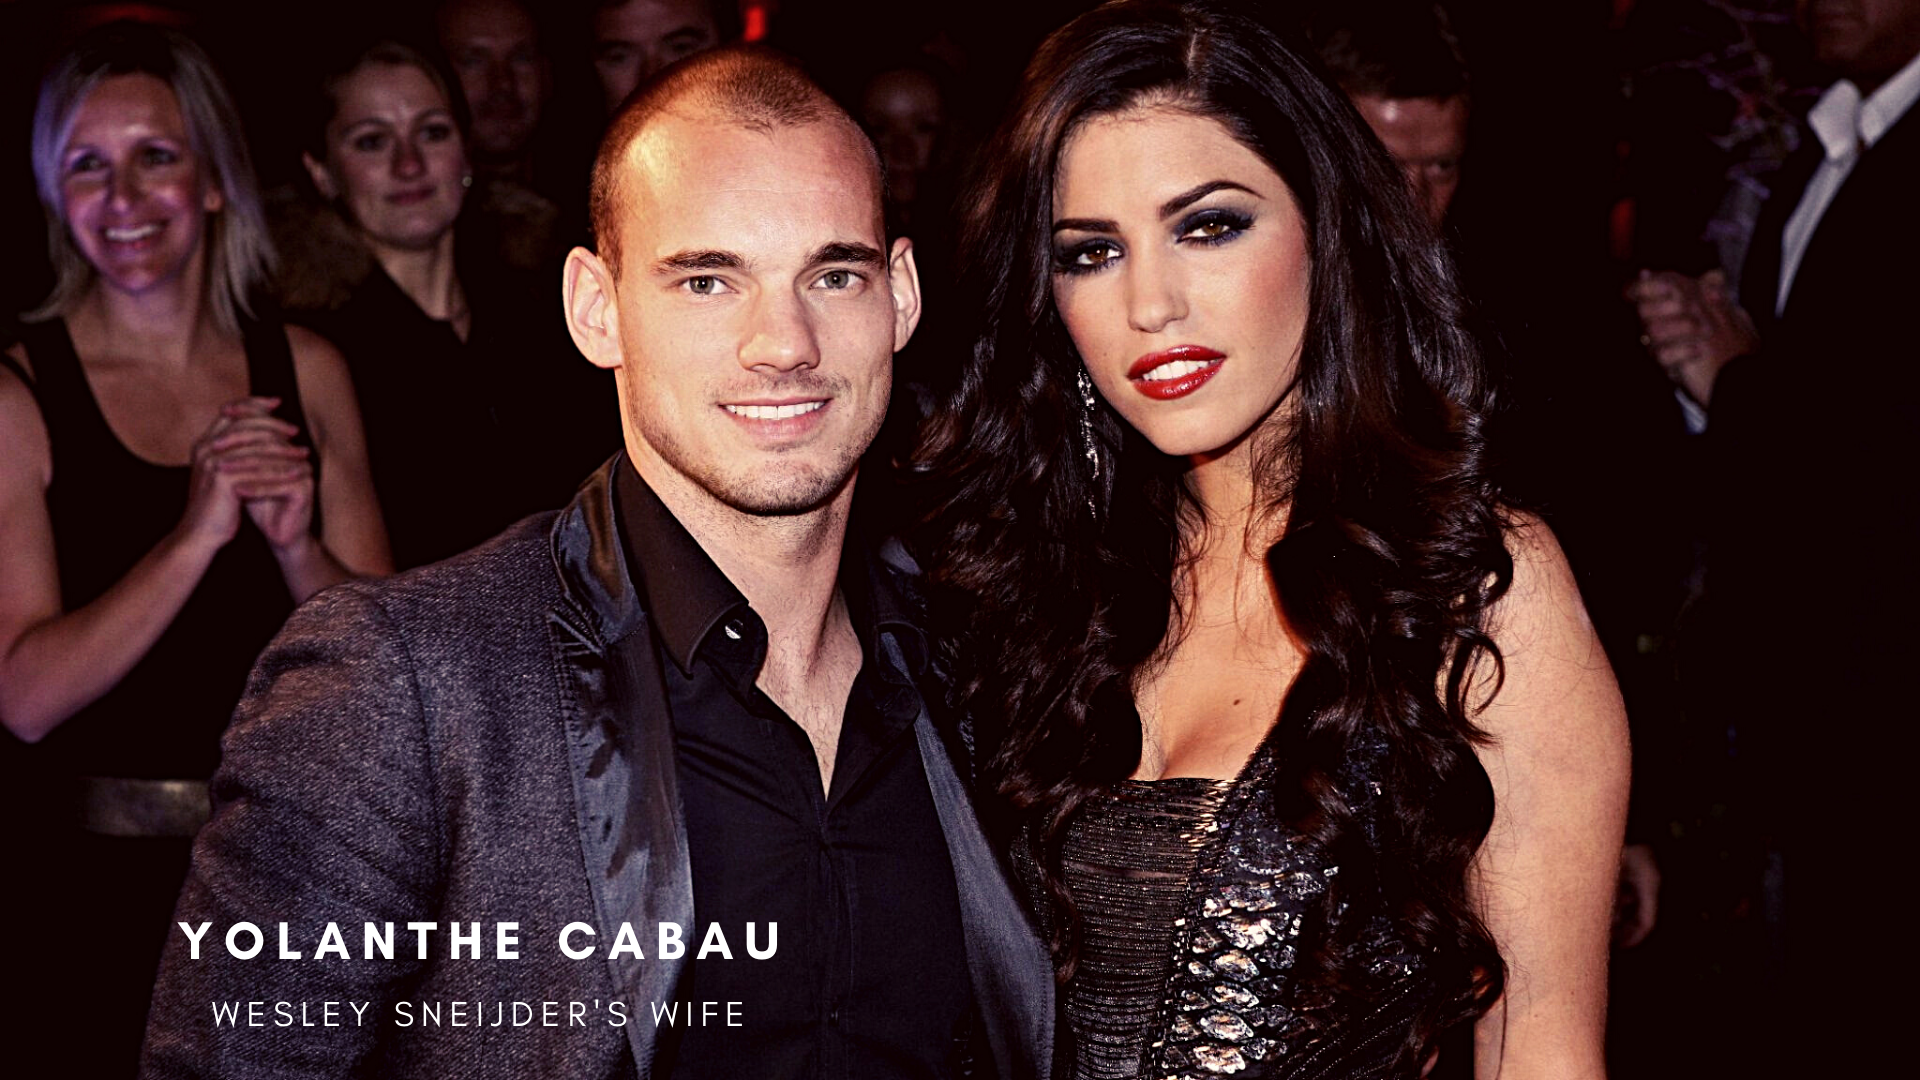 Wesley Sneijder with his wife Yolanthe Cabau. (Picture was taken from world-today-news.com)